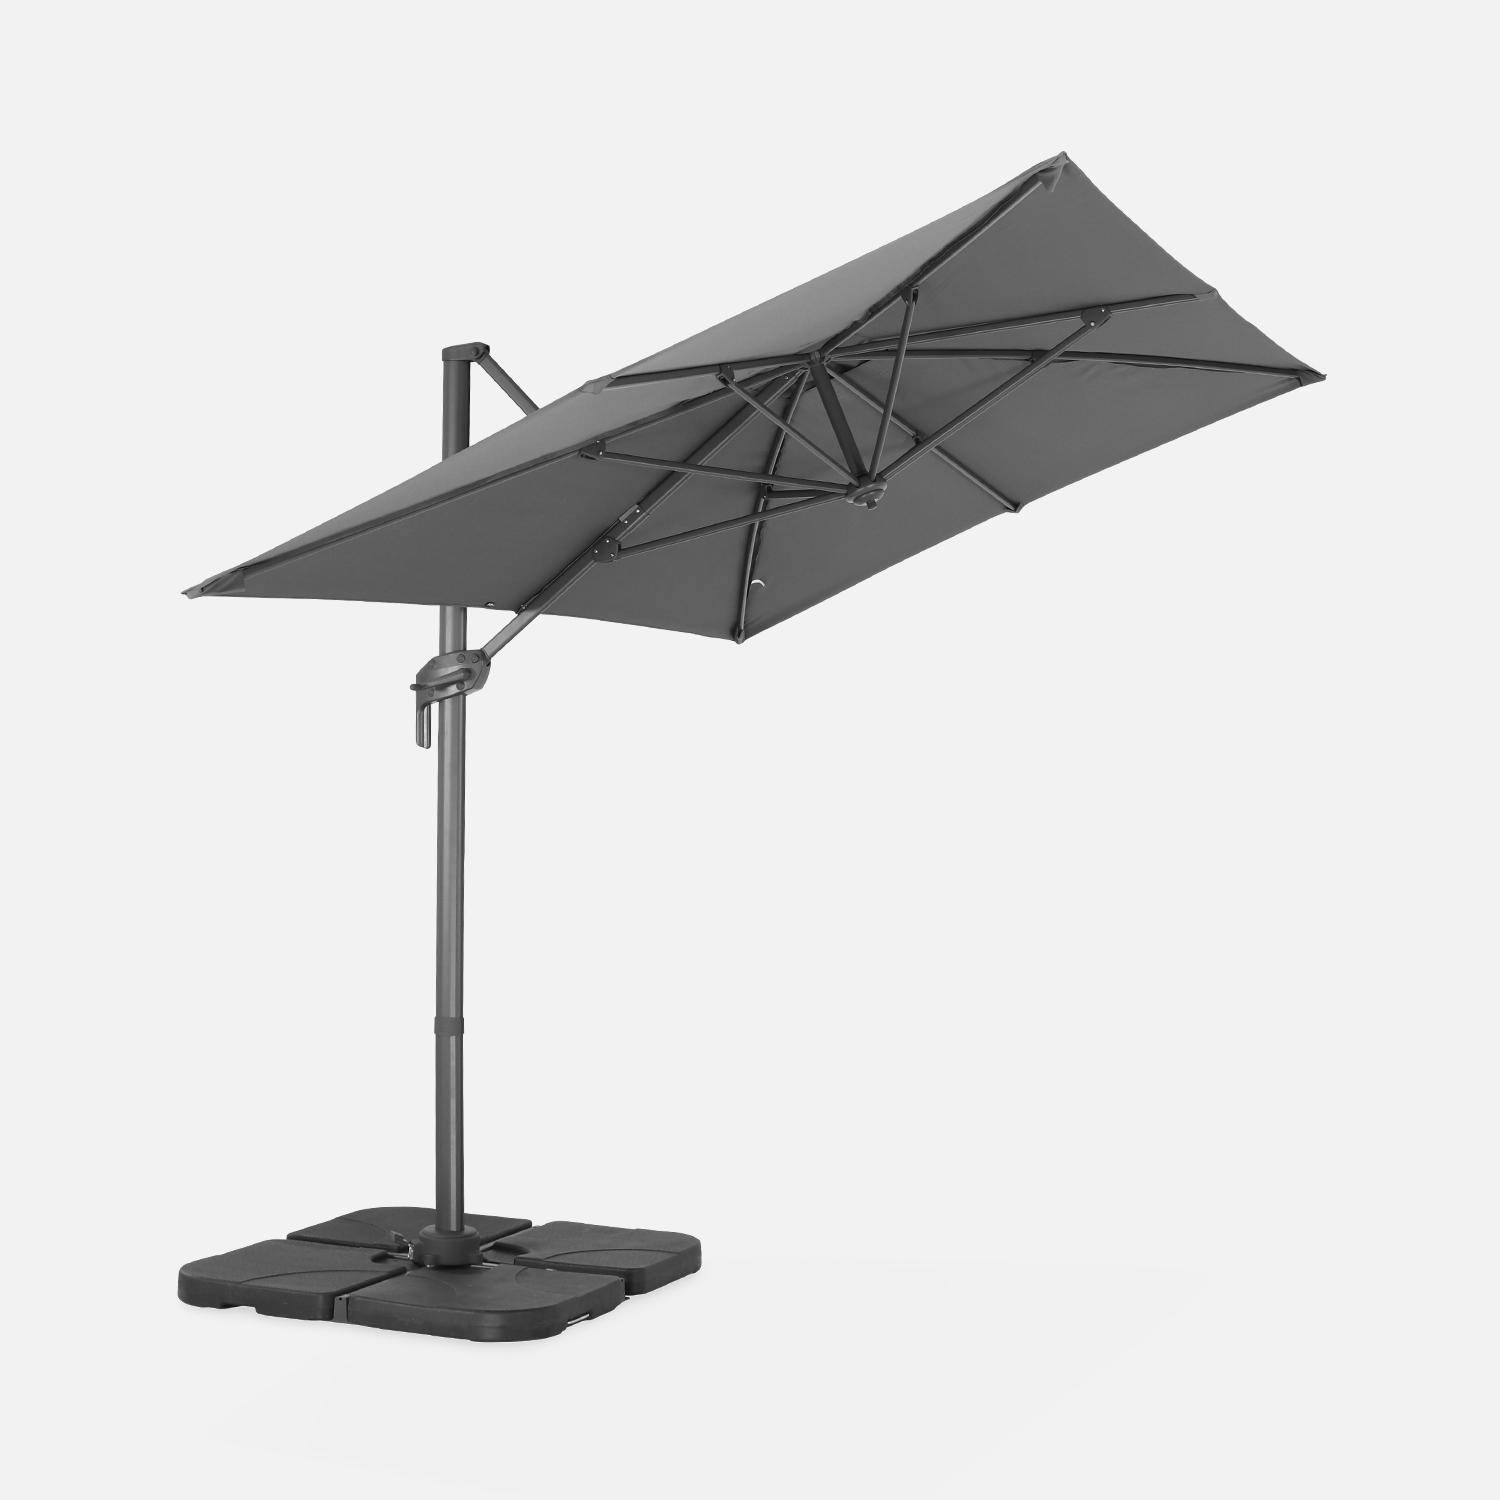 2x3m rectangular cantilever paraso - parasol can be tilted, folded and rotated 360 degreesl - Antibes - Grey,sweeek,Photo5